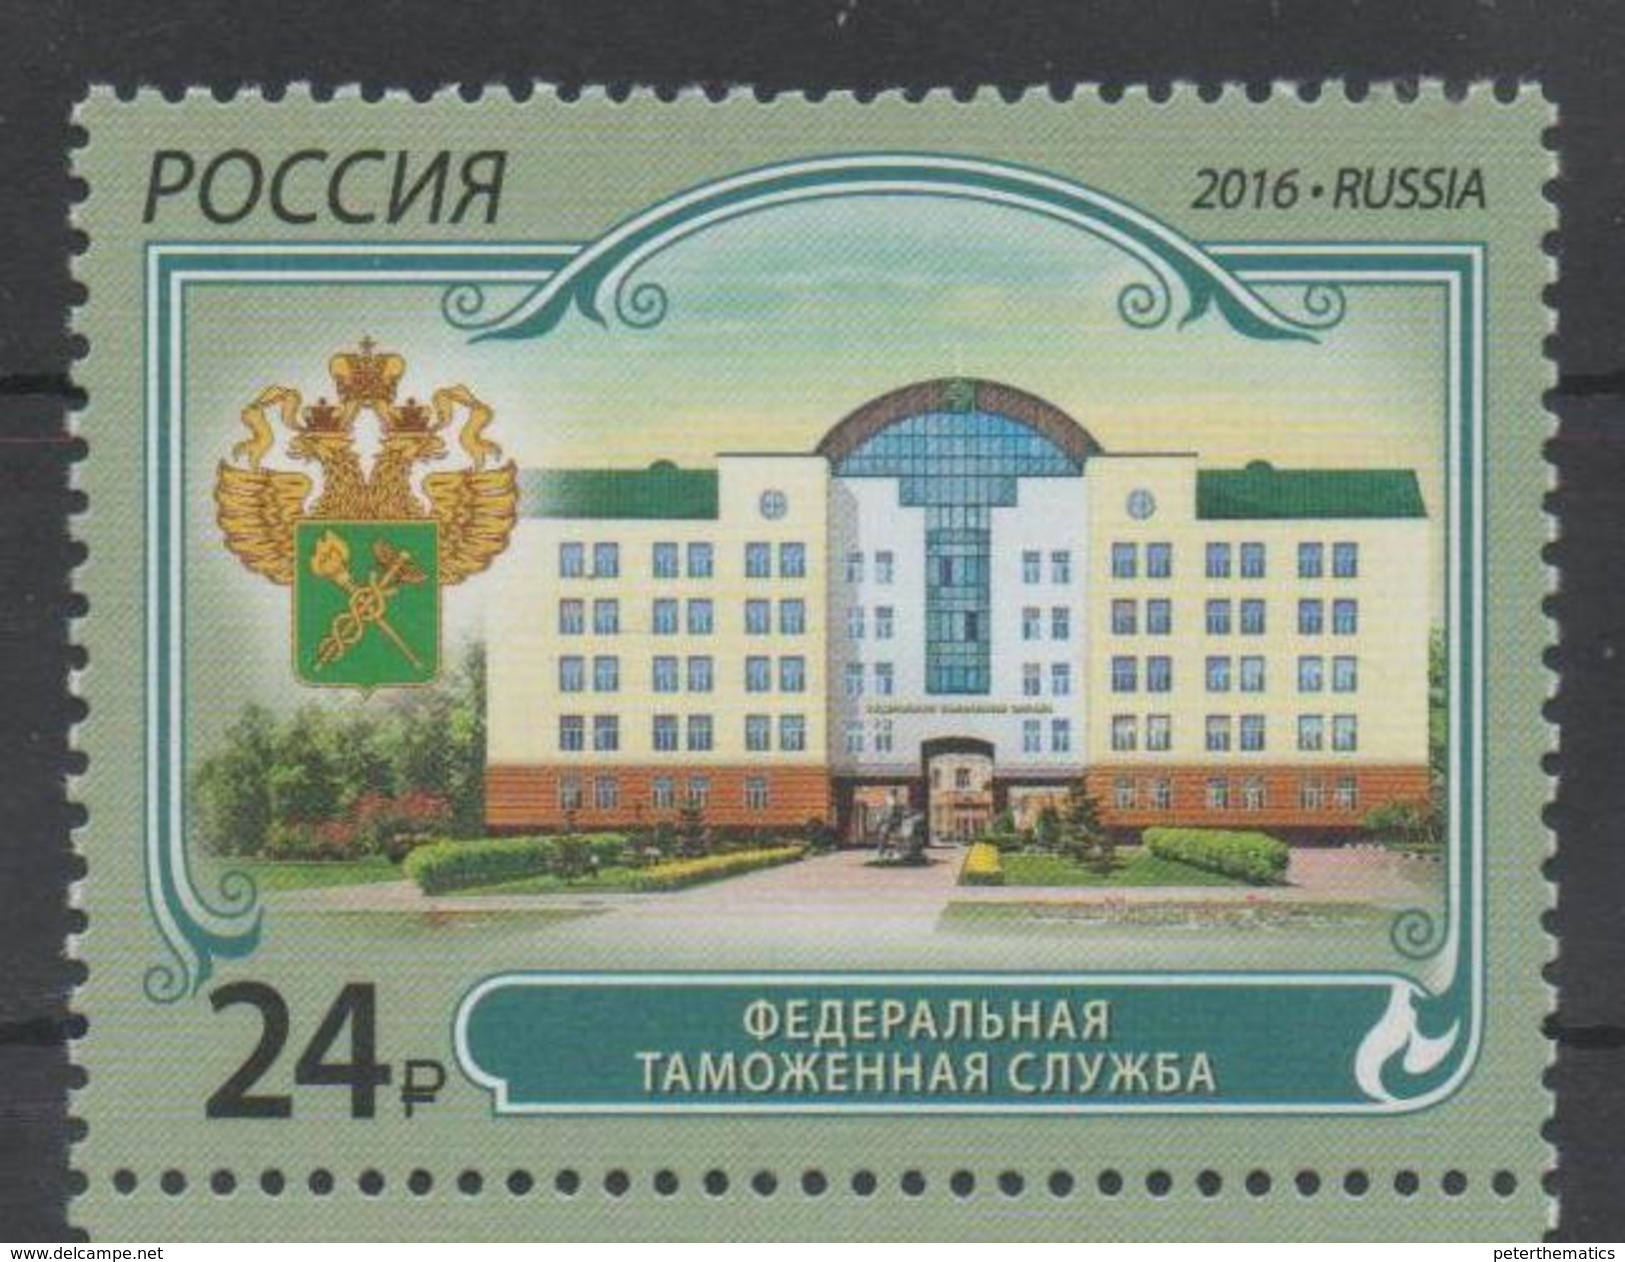 RUSSIA, 2016, MNH,FEDERAL CUSTOMS SERVICE, COAT OF ARMS, 1v - Unclassified